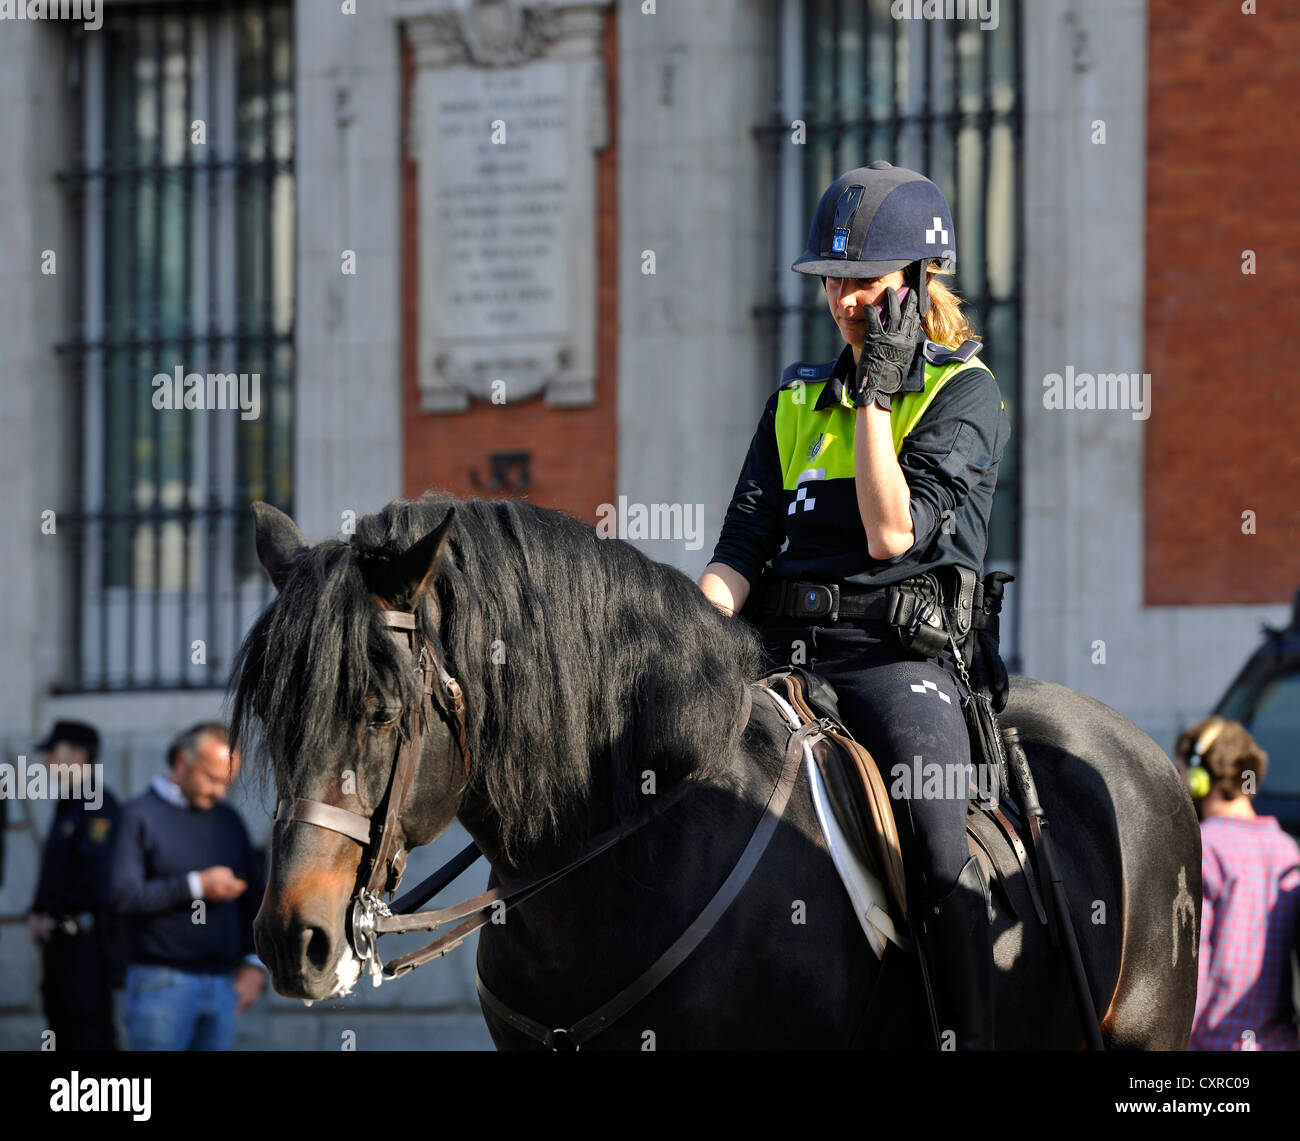 City police on horseback, female police officer speaking on a mobile phone, Plaza Puerta del Sol square, Madrid, Spain, Europe Stock Photo